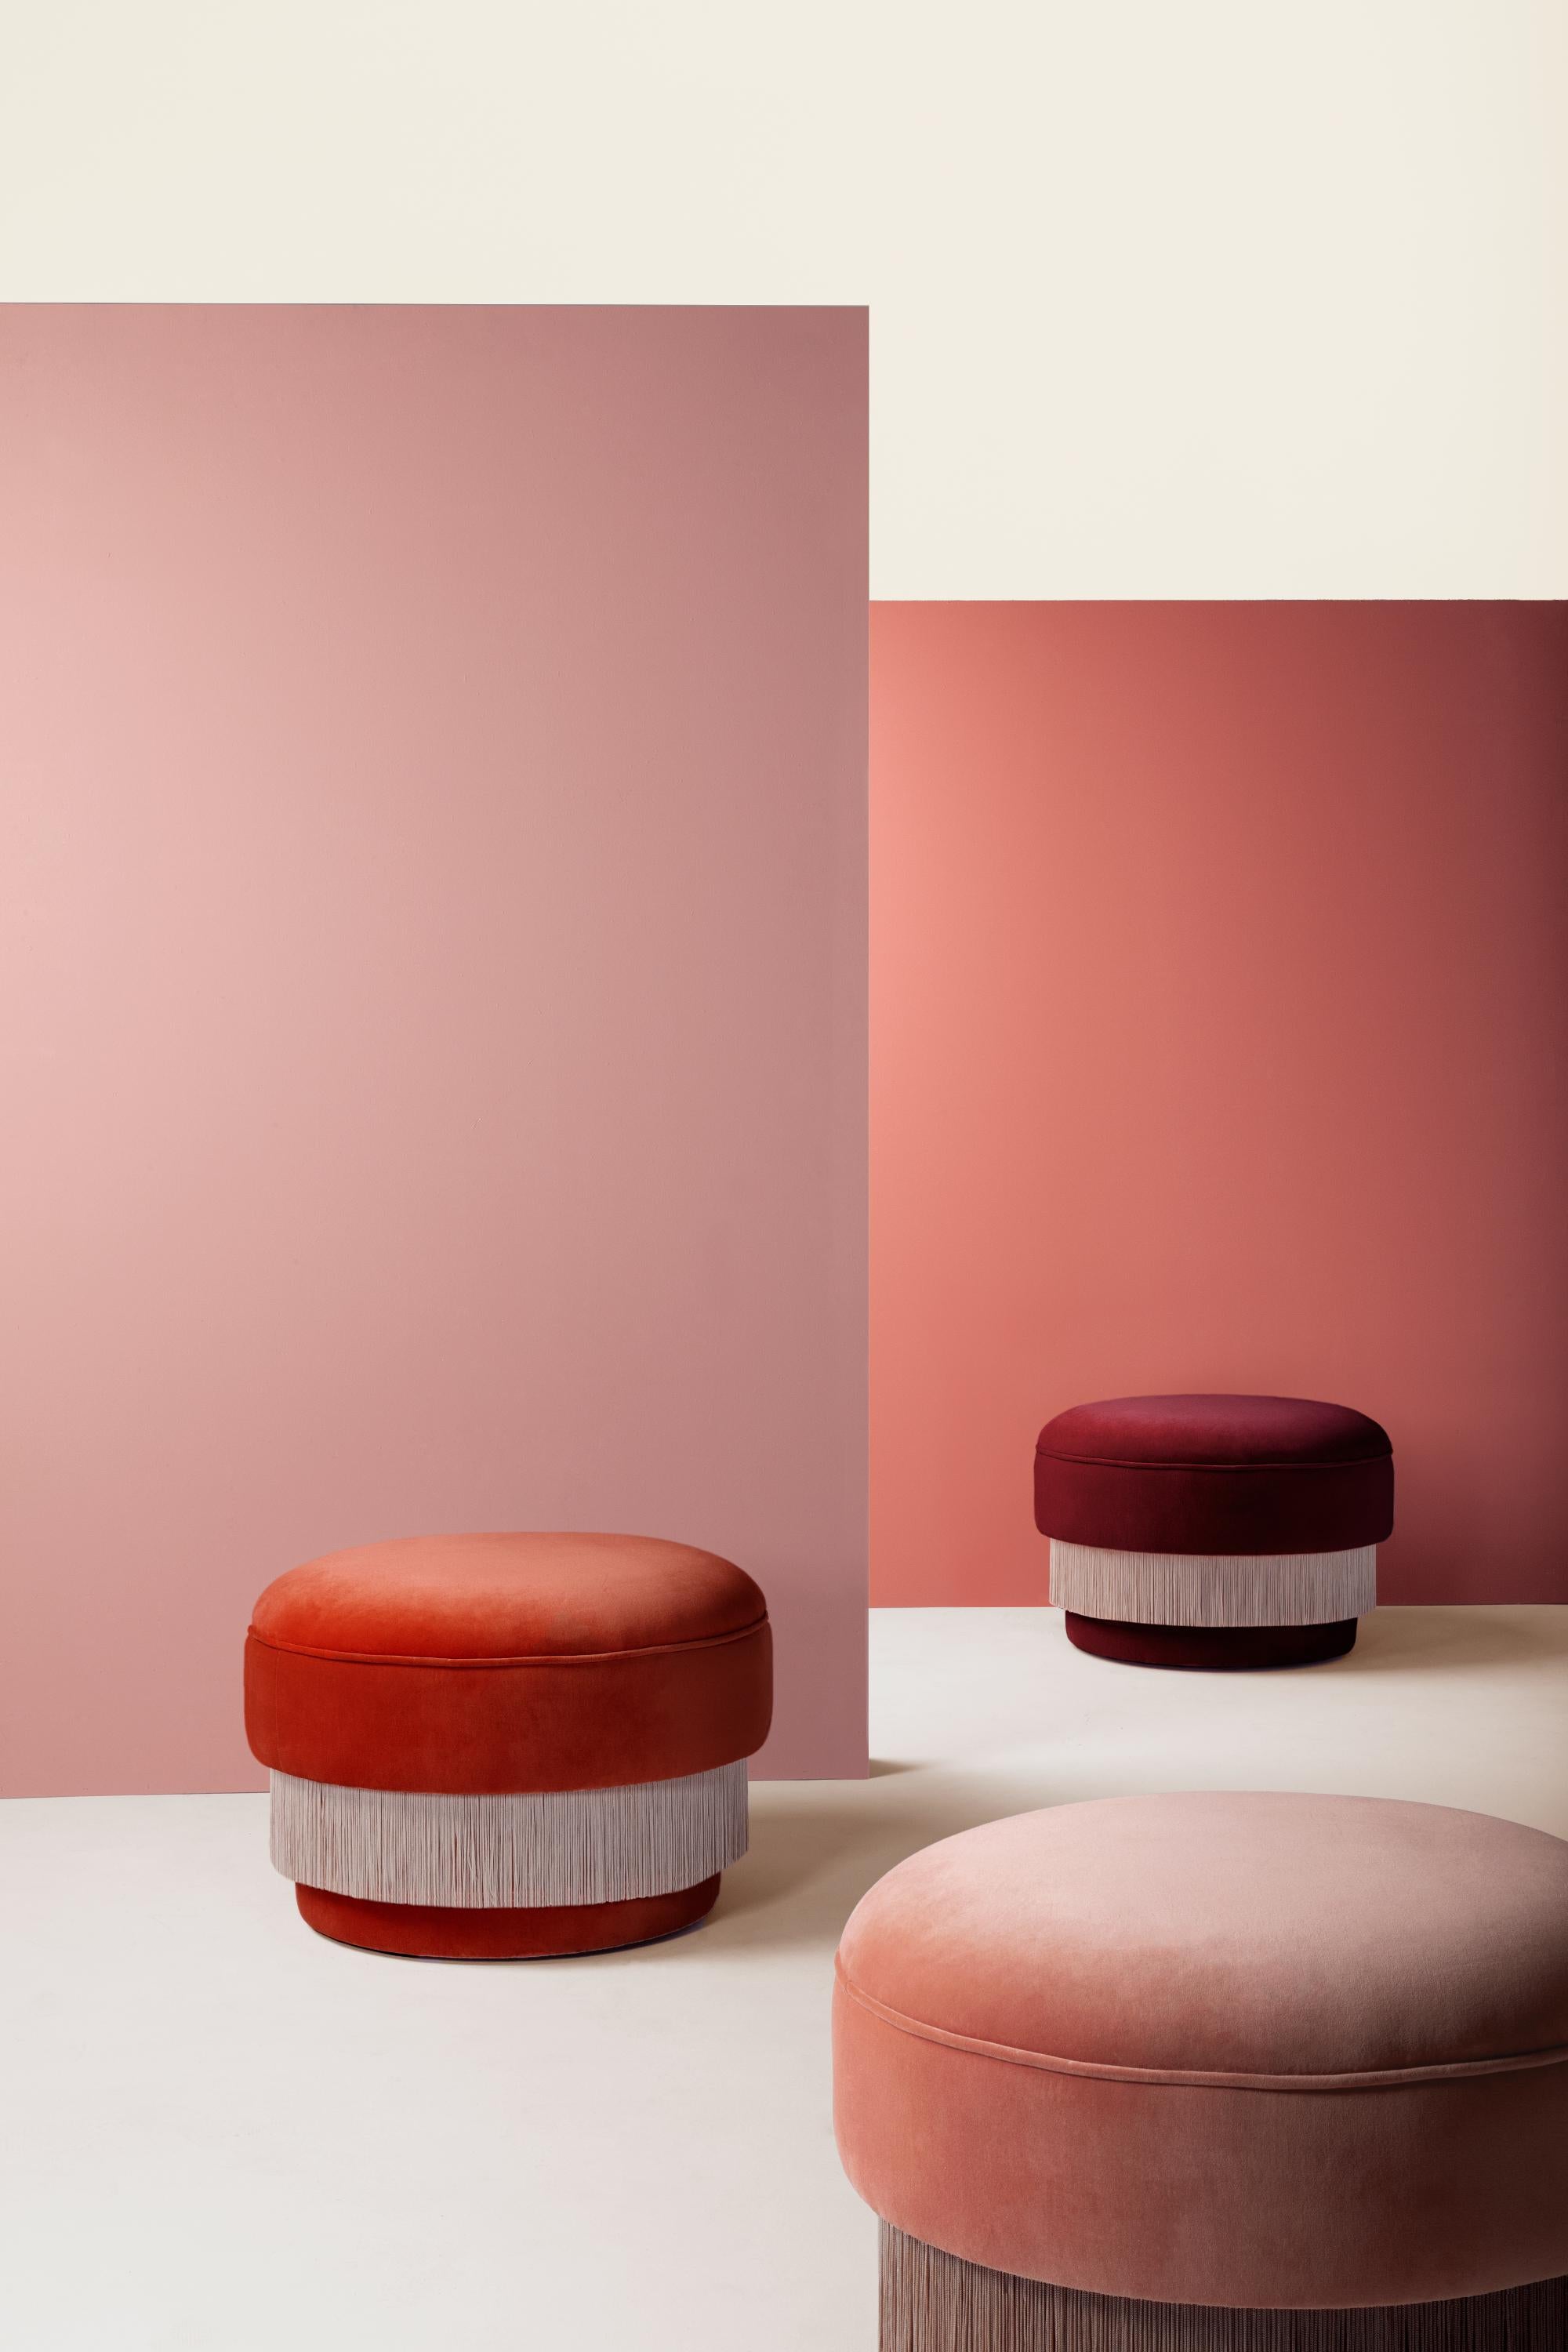 Folie Pouf by Dooq
Measures: Ø 64 cm 25”
h 44 cm 17”

Materials: upholstery and piping fabric or leather

Dooq is a design company dedicated to celebrate the luxury of living. Creating designs that stimulate the senses, whose conceptual